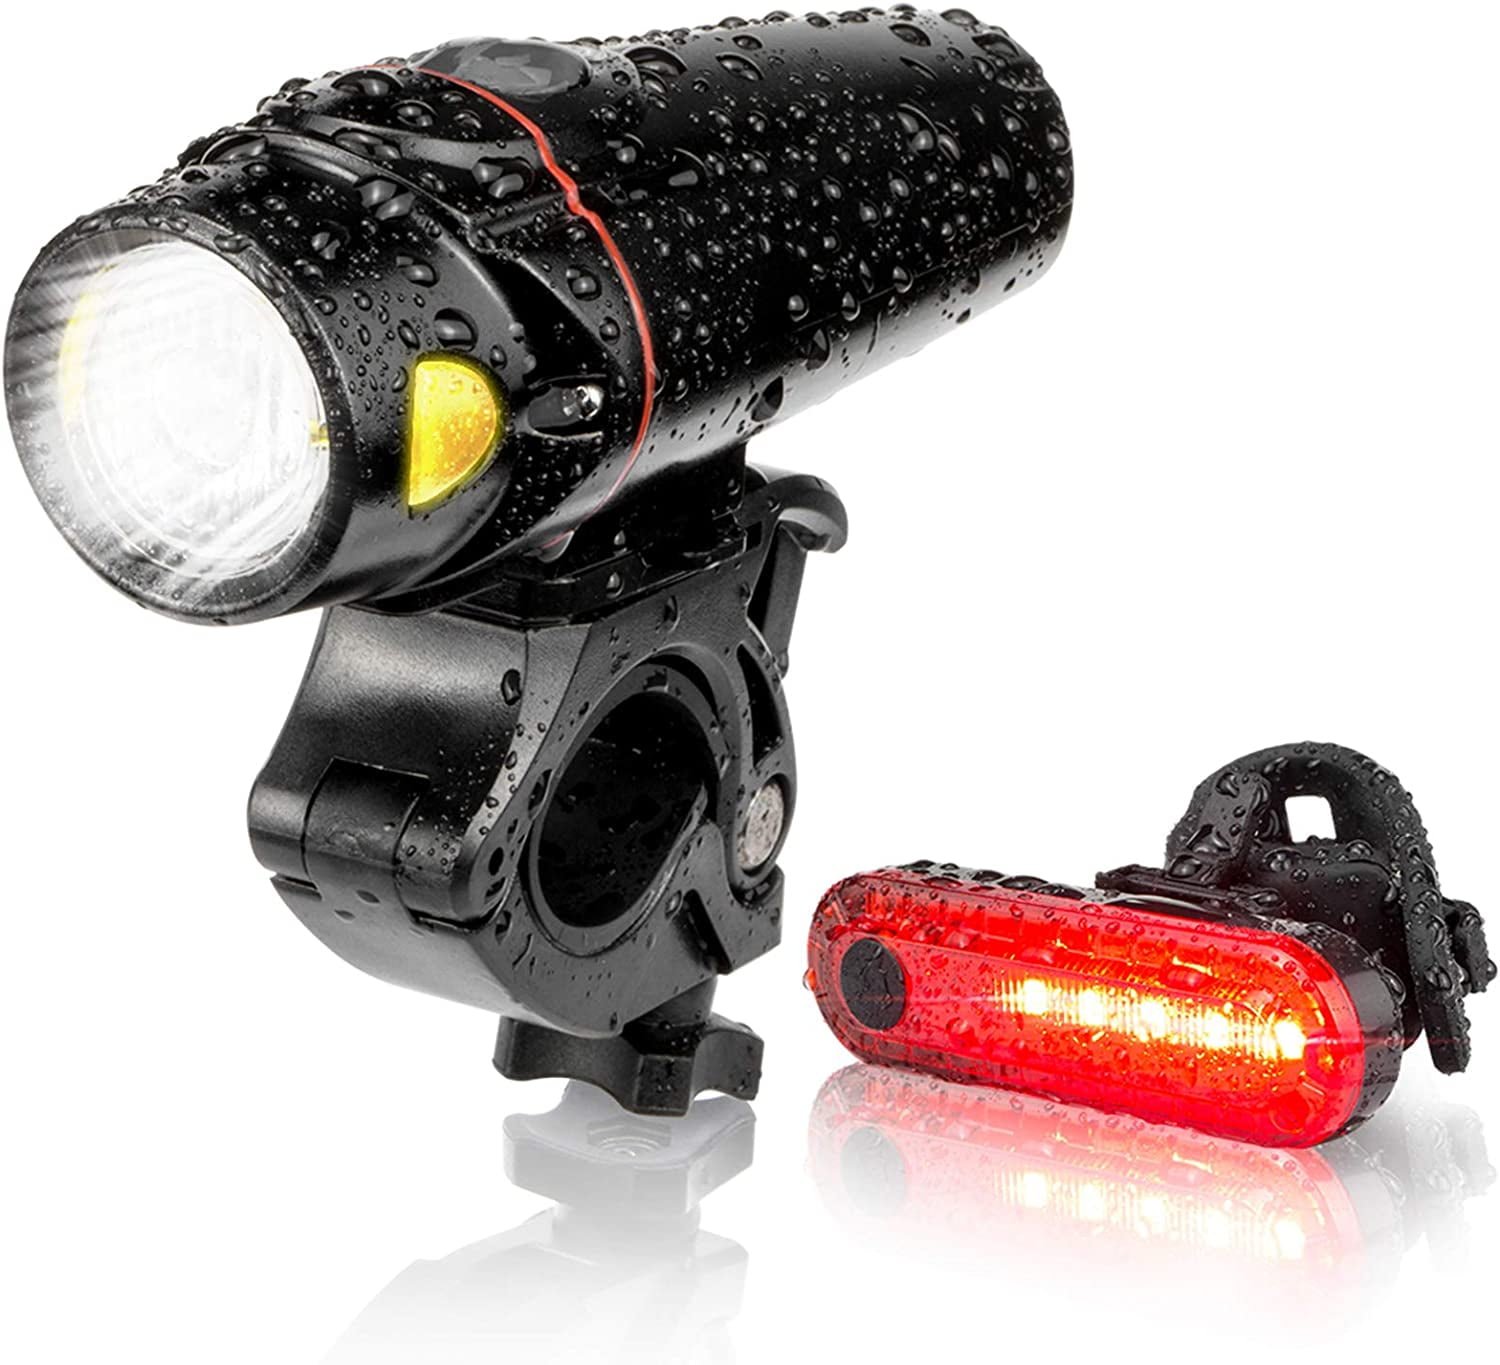 BIKE LED BRIGHT FRONT HEAD LIGHT SAFETY FLEXIBLE SILICON NO TOOLS REQUIRED 